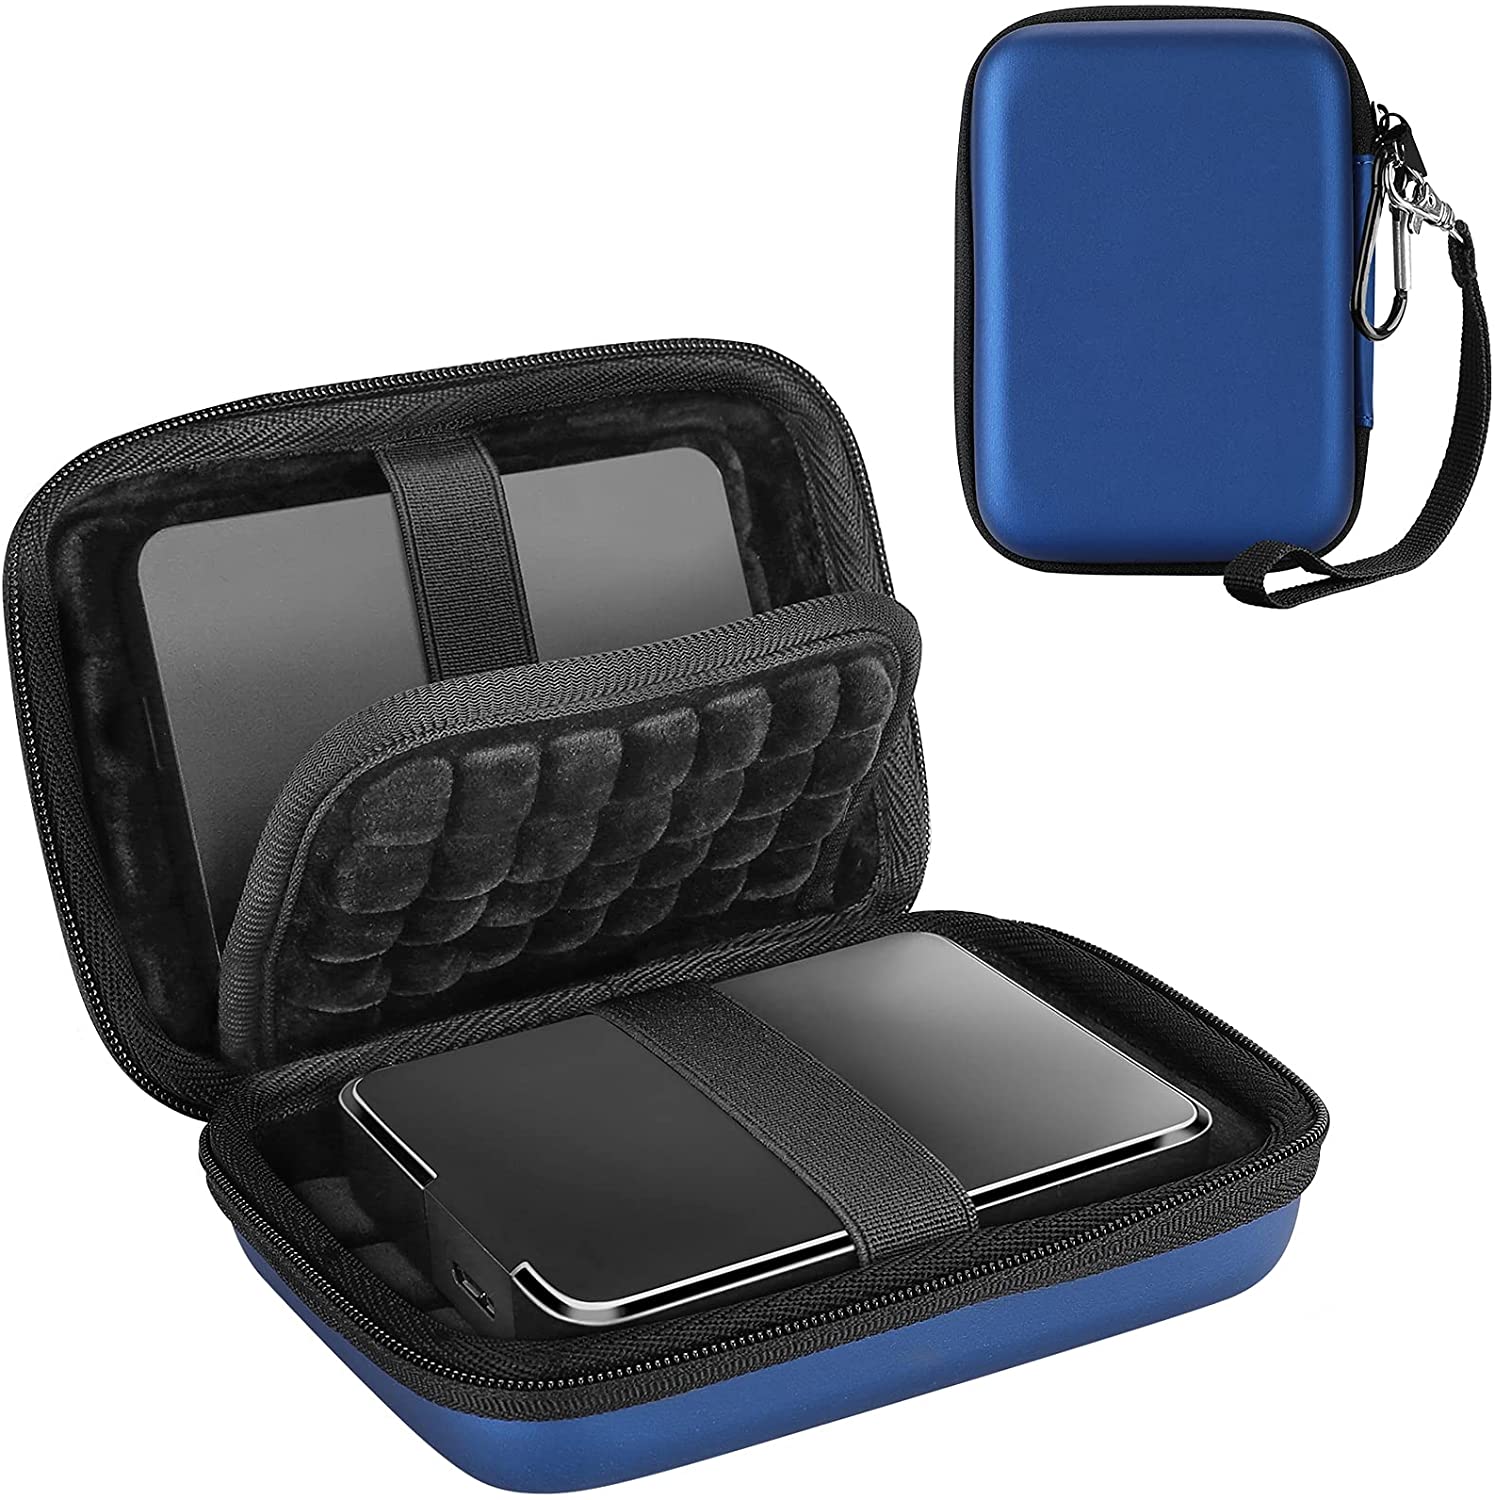 CASE ONLY) Hard Drive Carrying Case for Elements WD My Passport